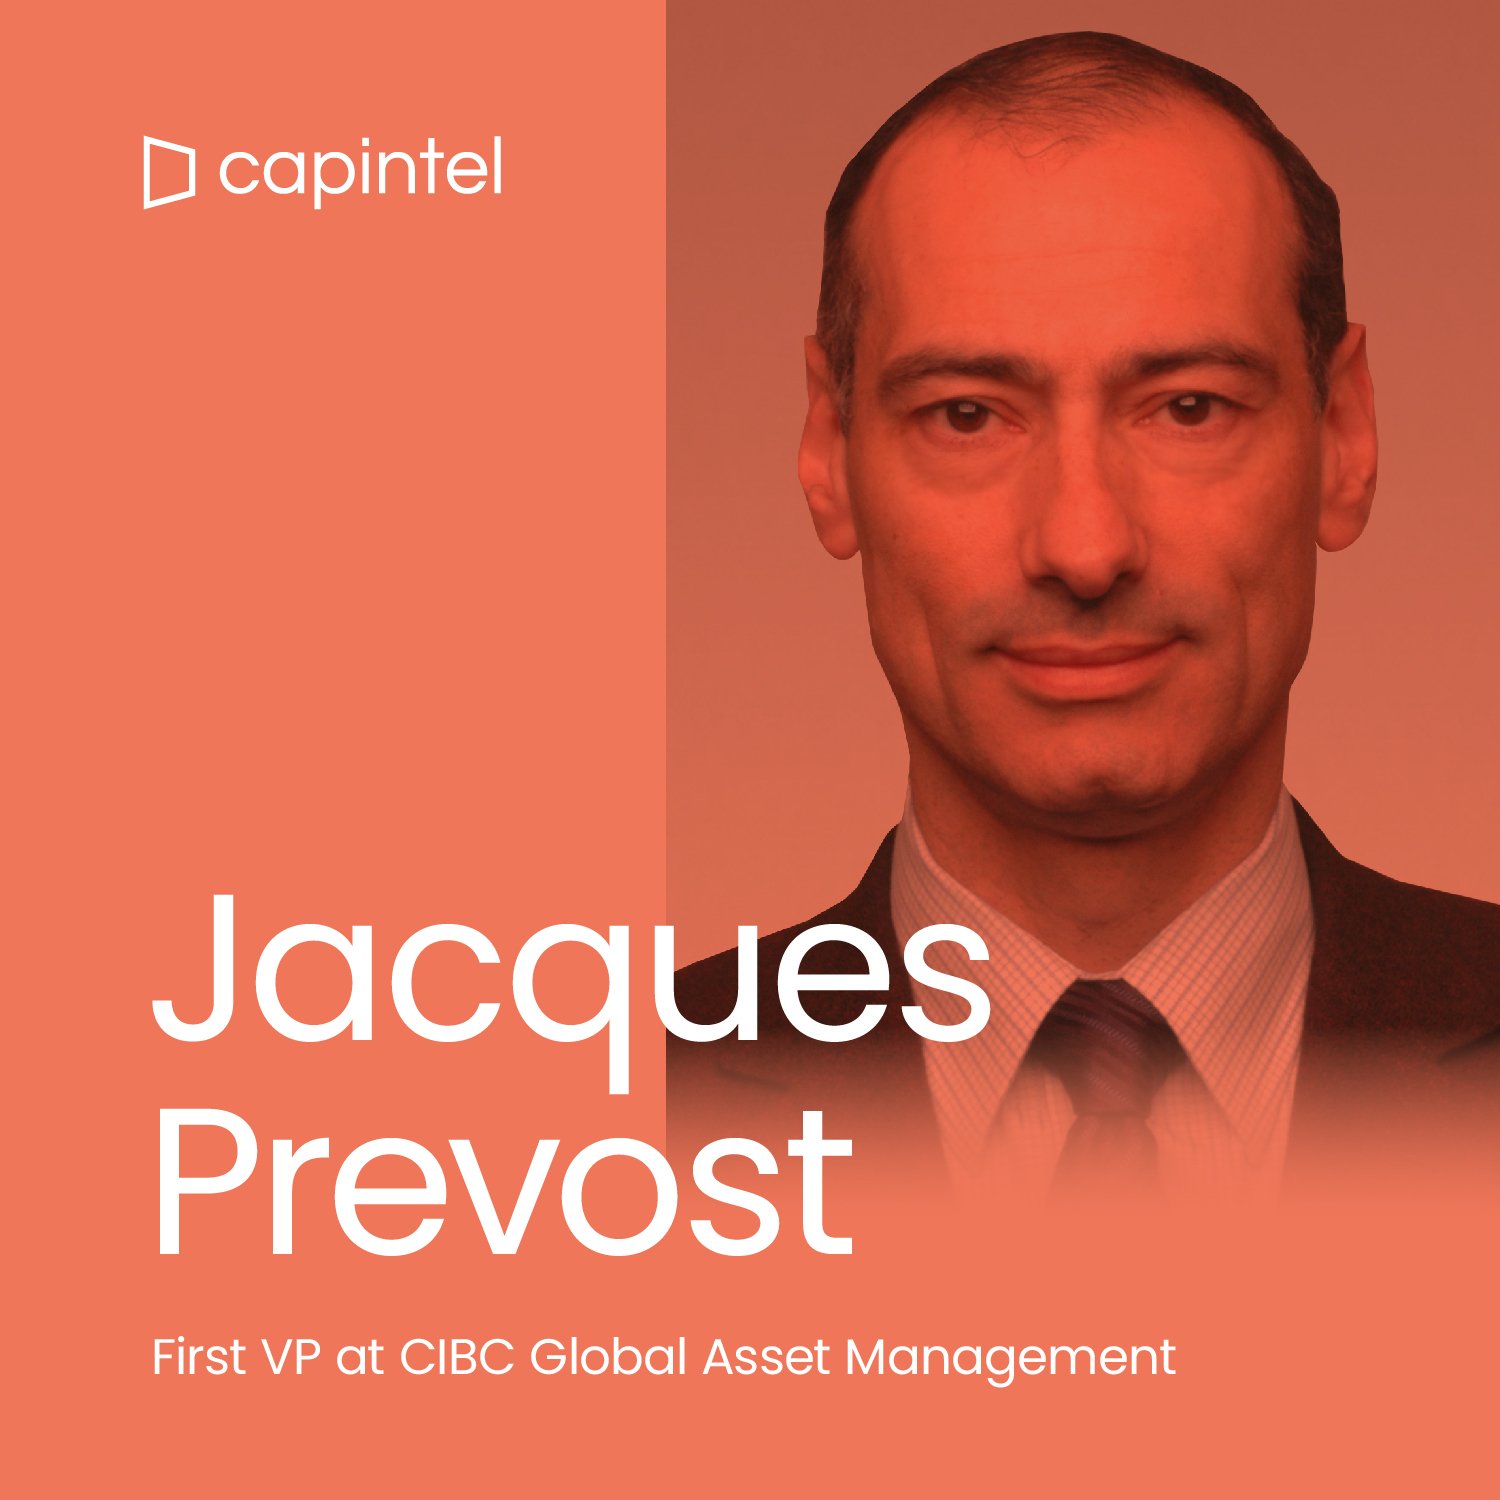 Demystifying Alternative Credit, with Jacques Prevost and CIBC Global Asset Management